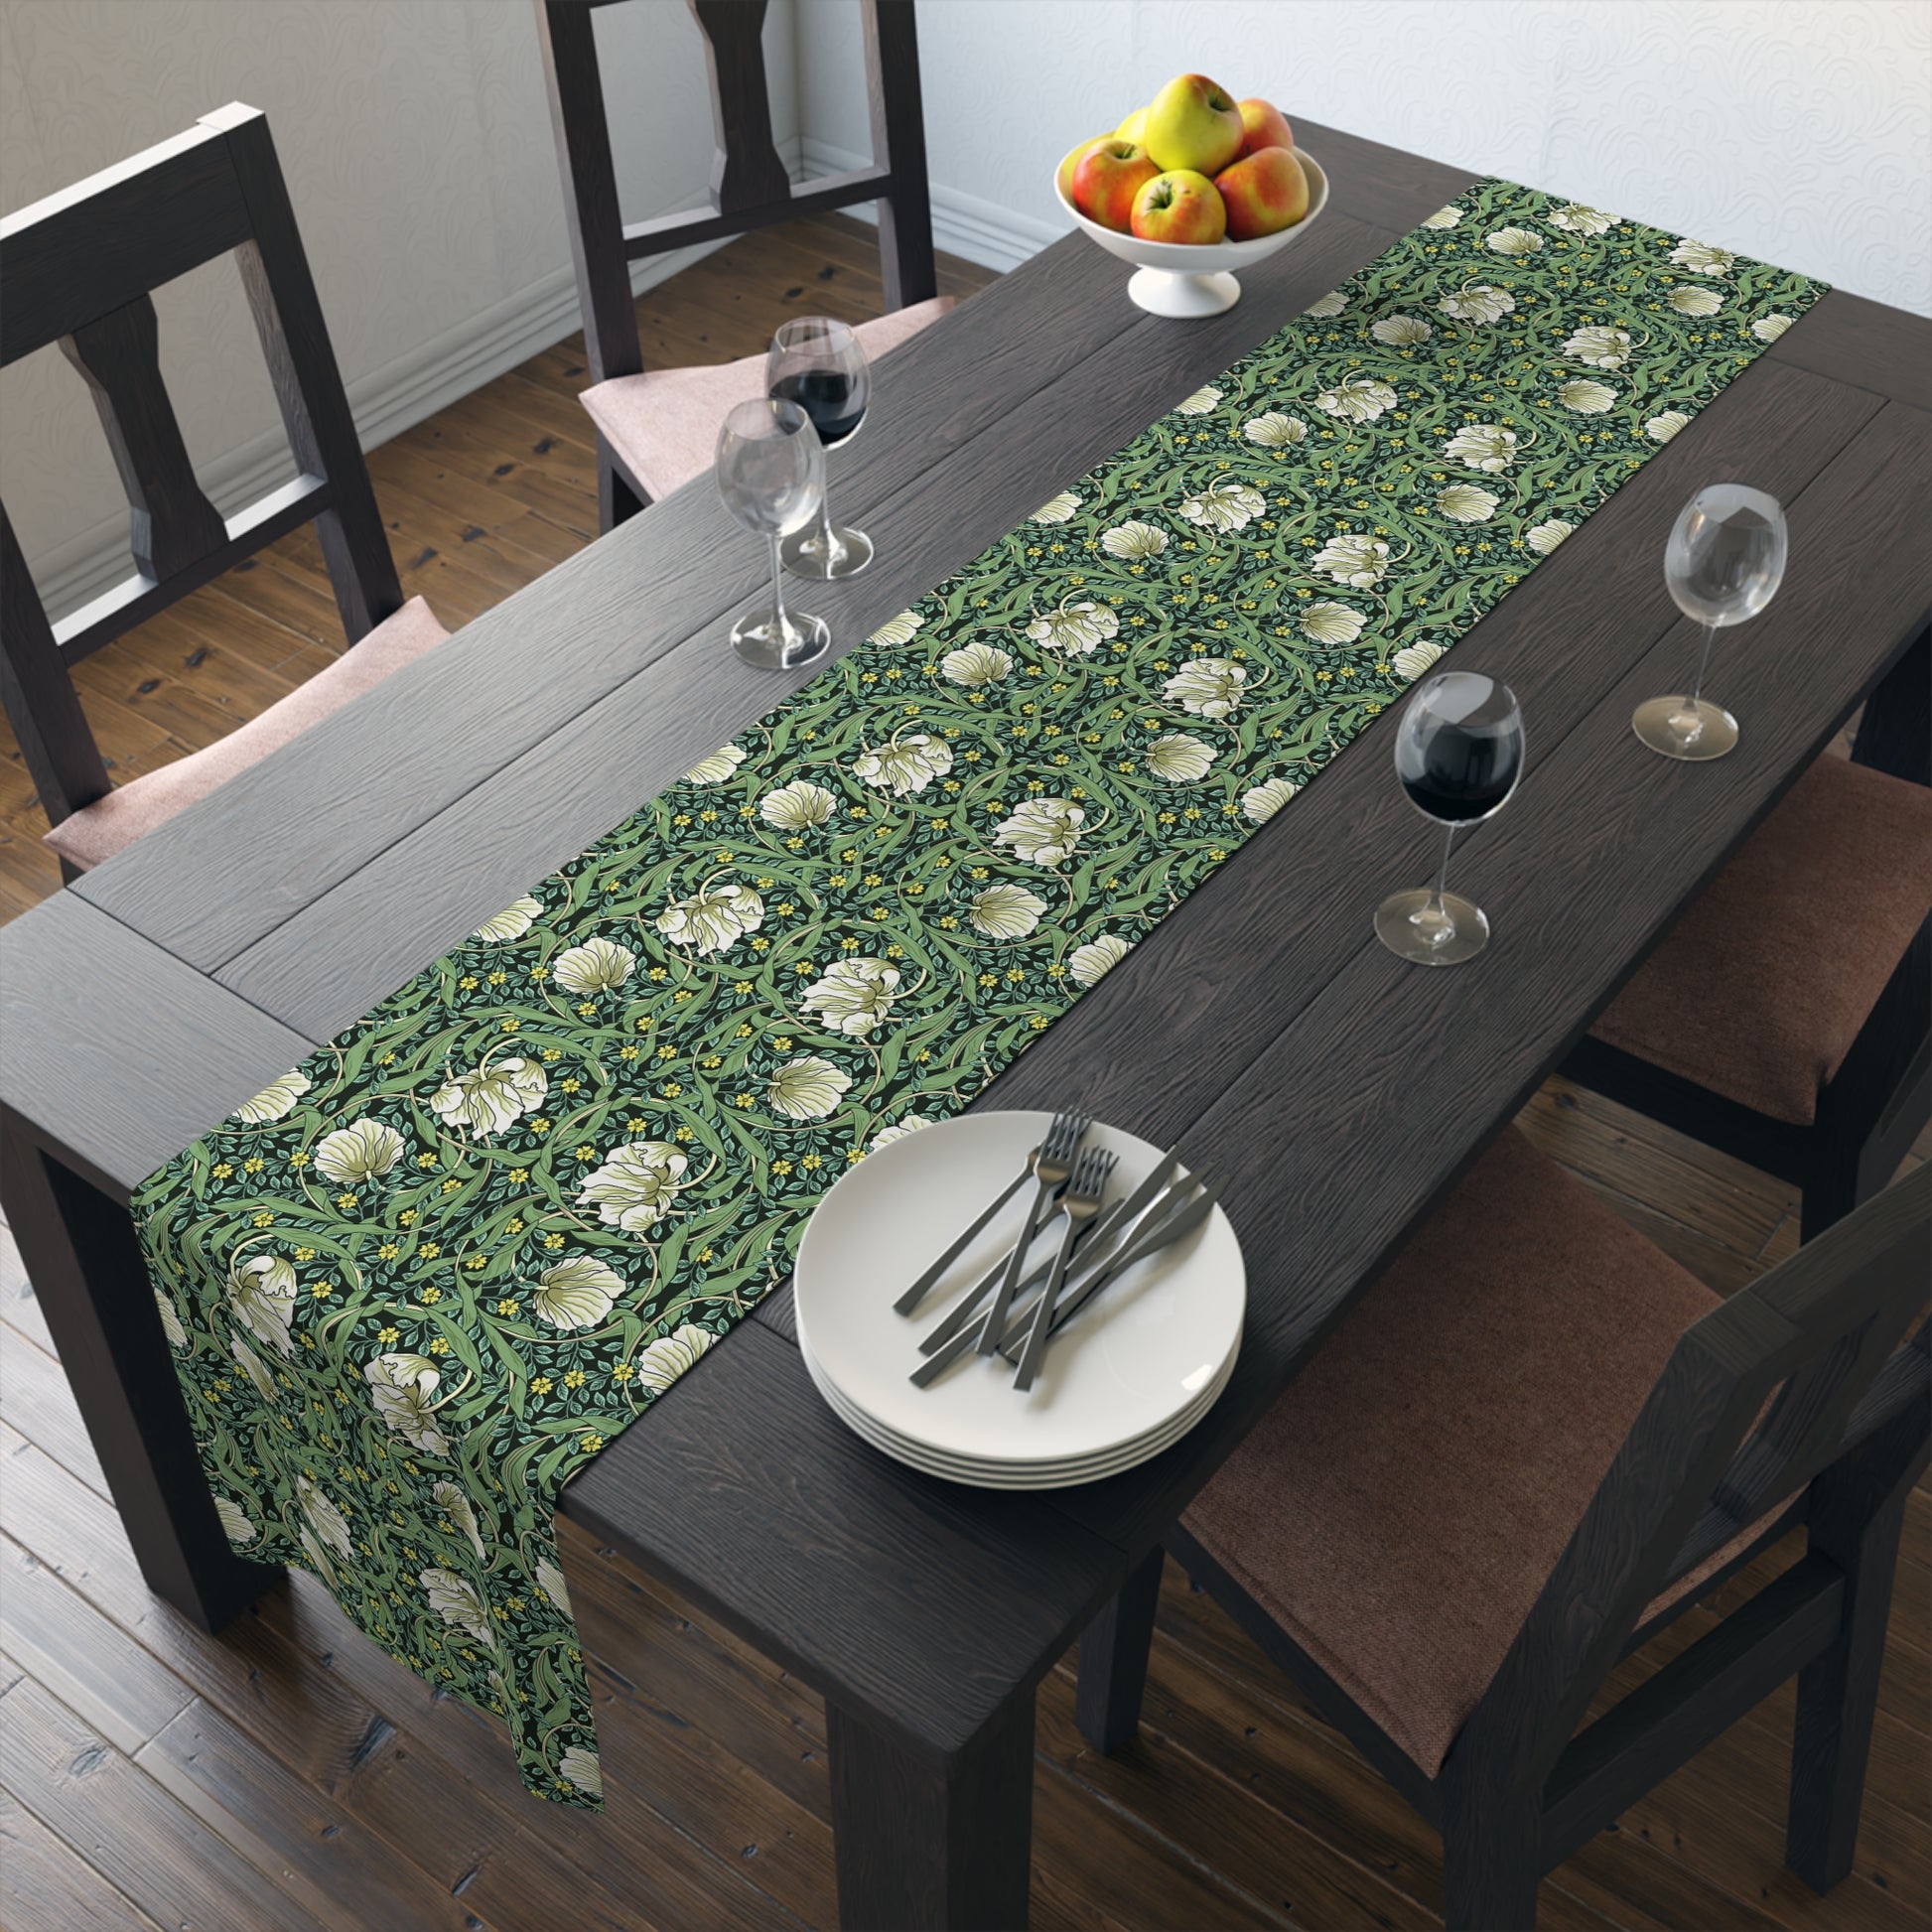 william-morris-co-table-runner-pimpernel-collection-green-21